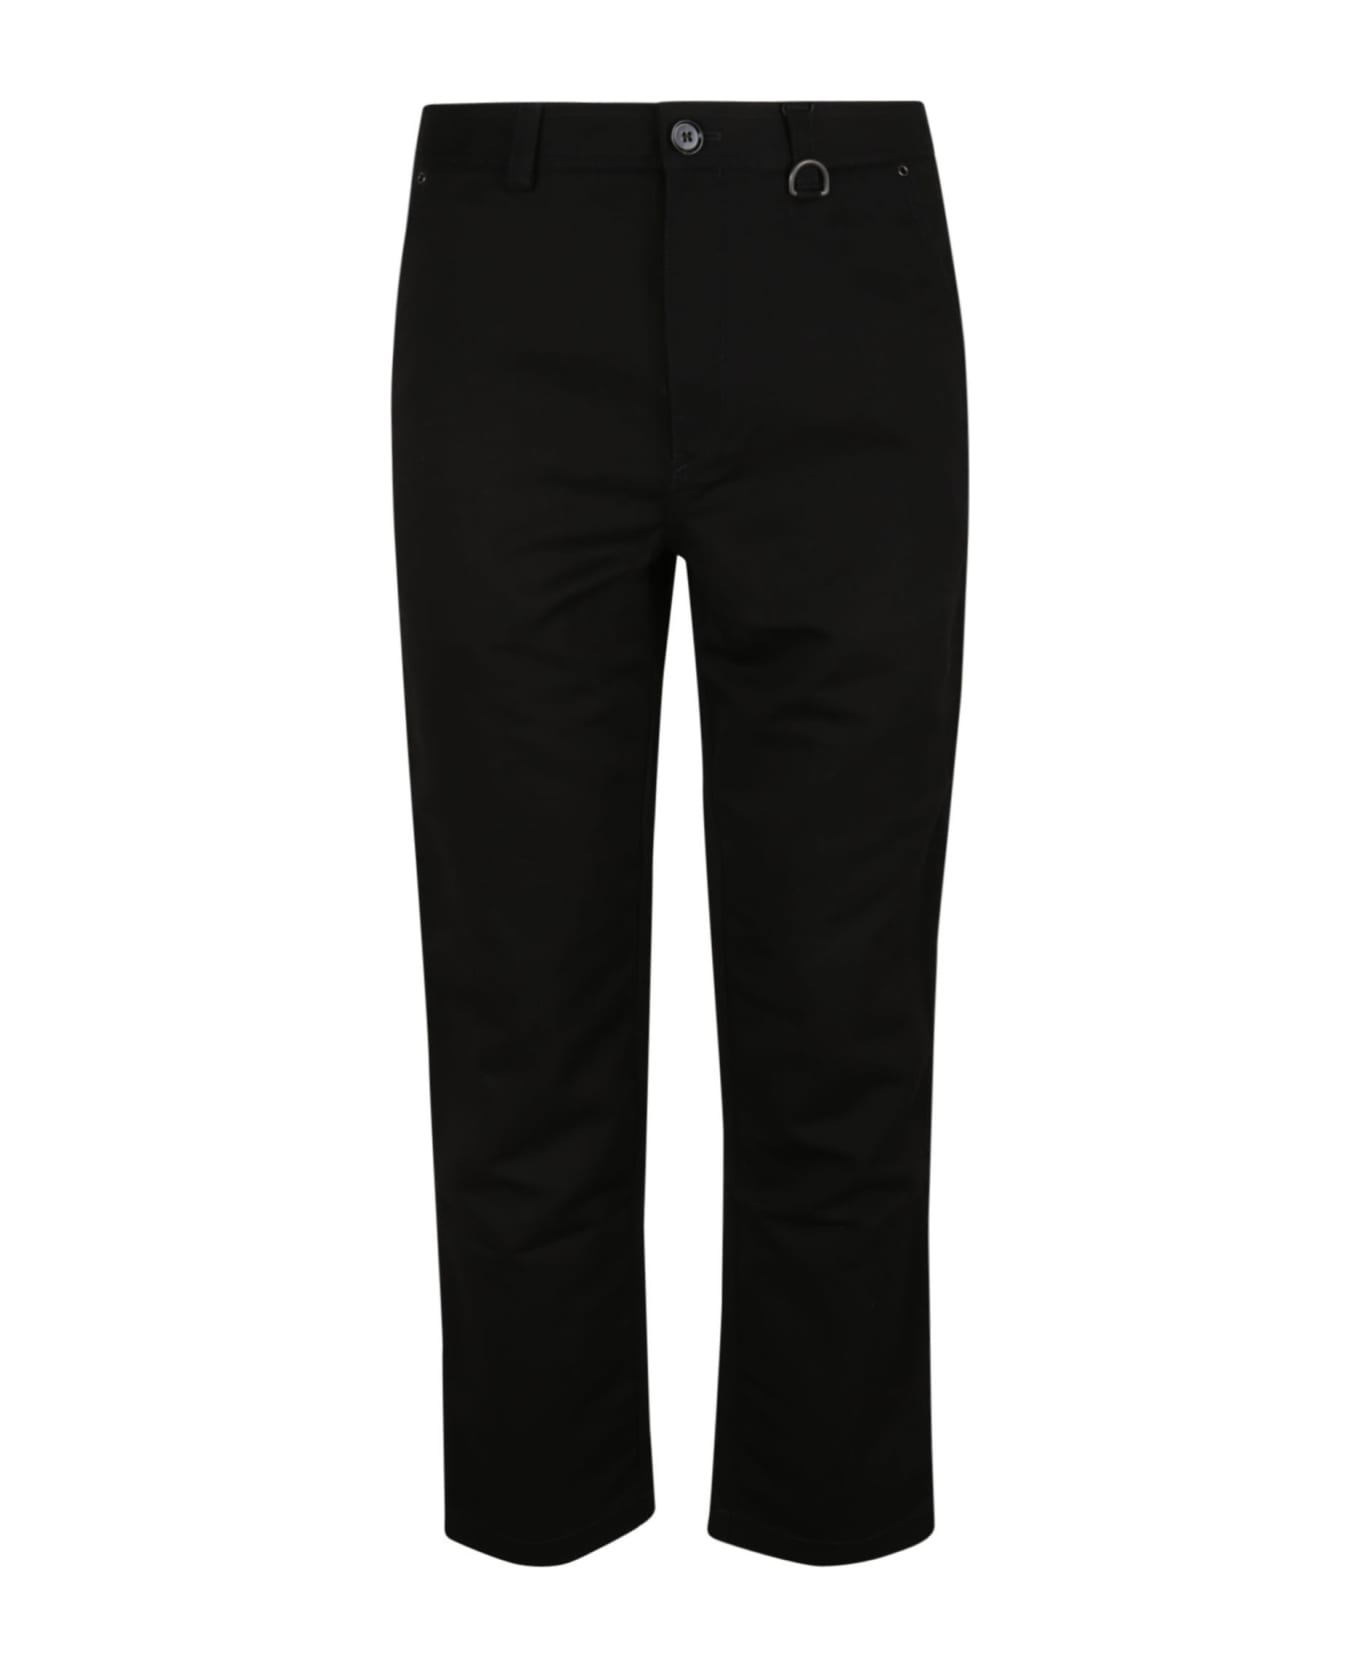 Burberry Buttoned Trousers - Black